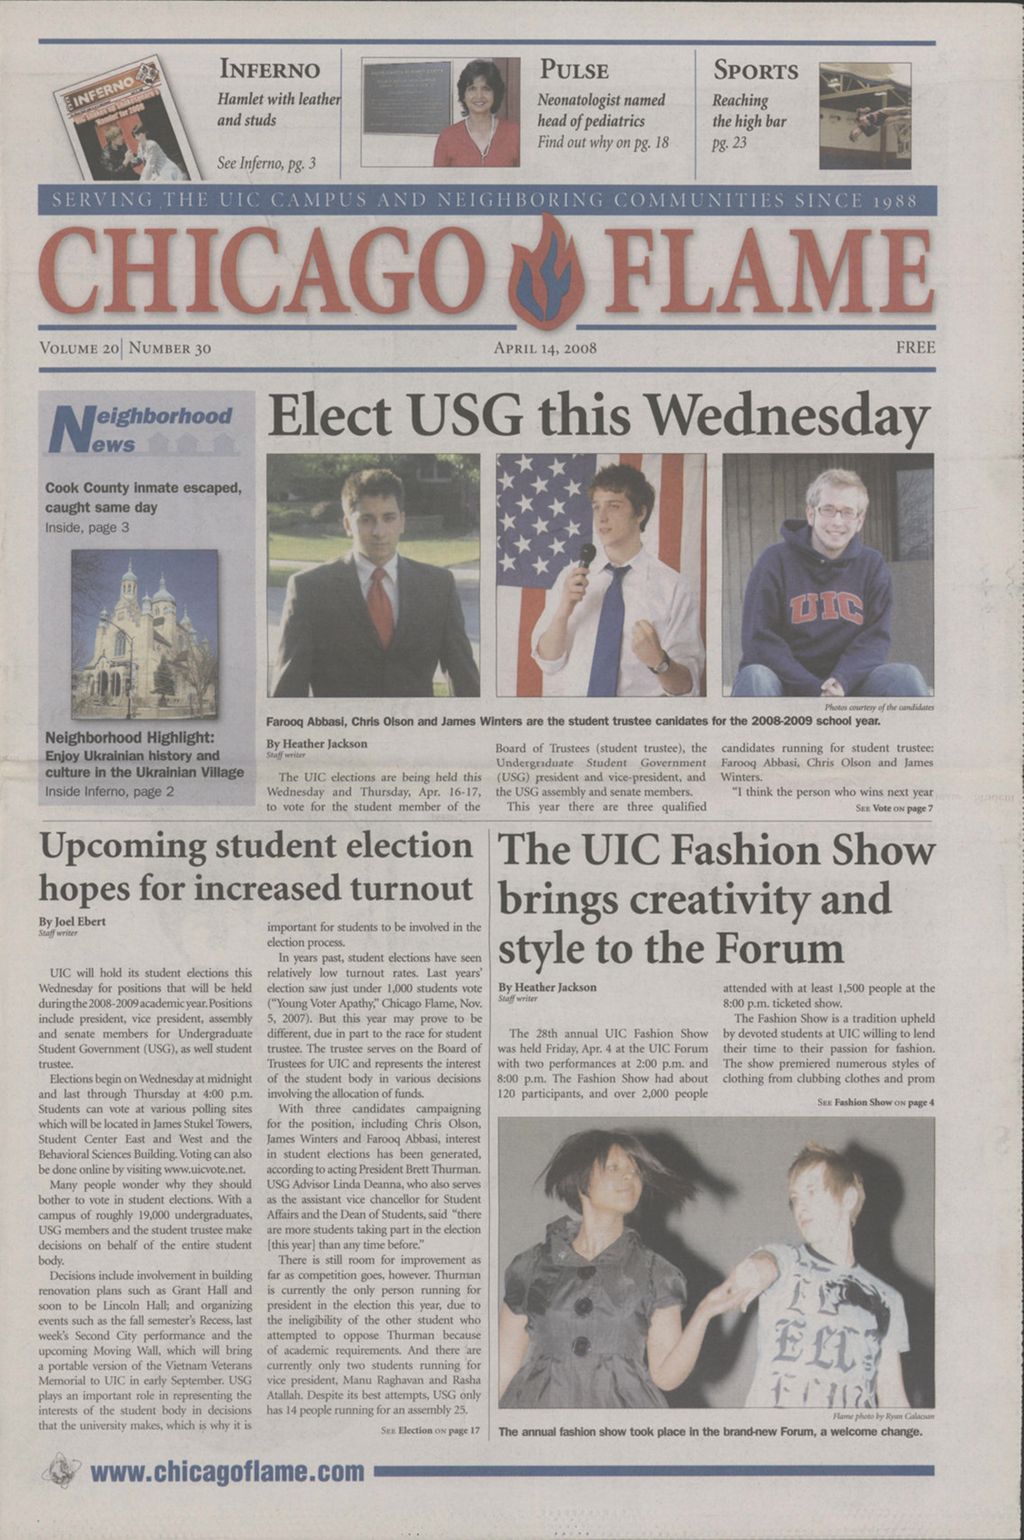 Chicago Flame (April 14, 2008)